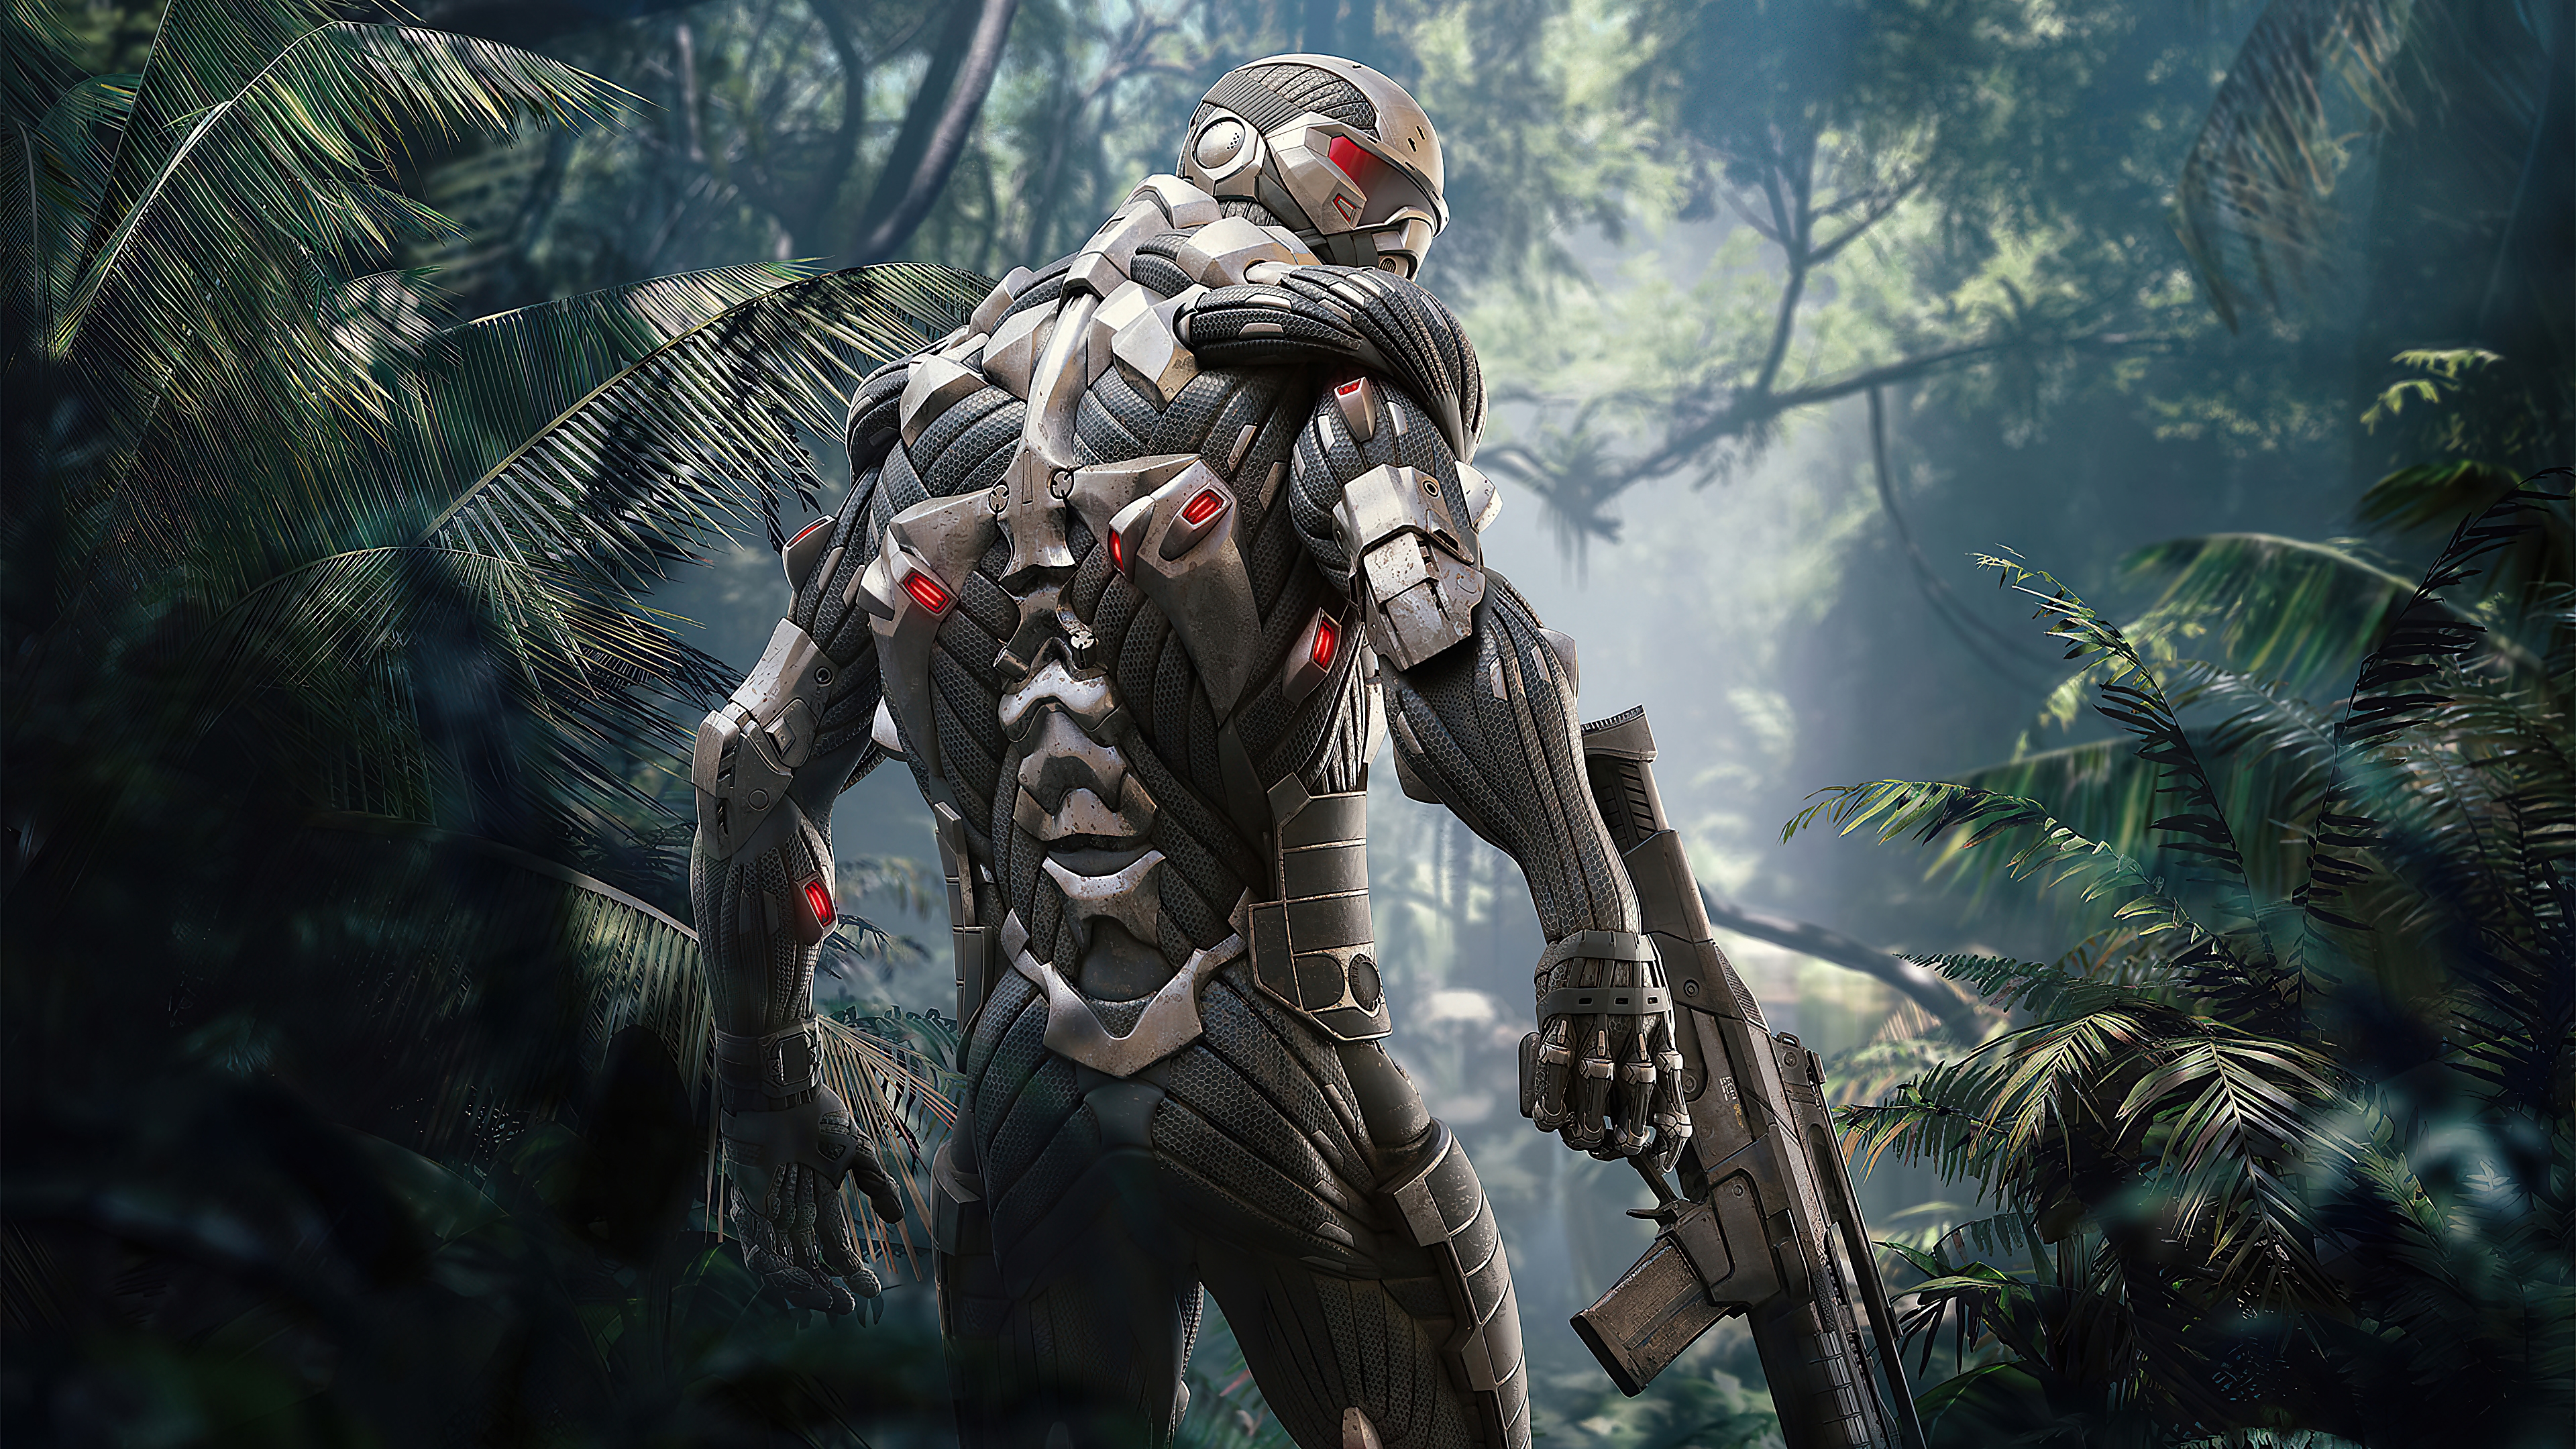 HD wallpaper, Nomad, Playstation 4, Xbox 360, Remastered, Crysis, Nintendo Switch, Pc Games, 2020 Games, Xbox One, Playstation 3